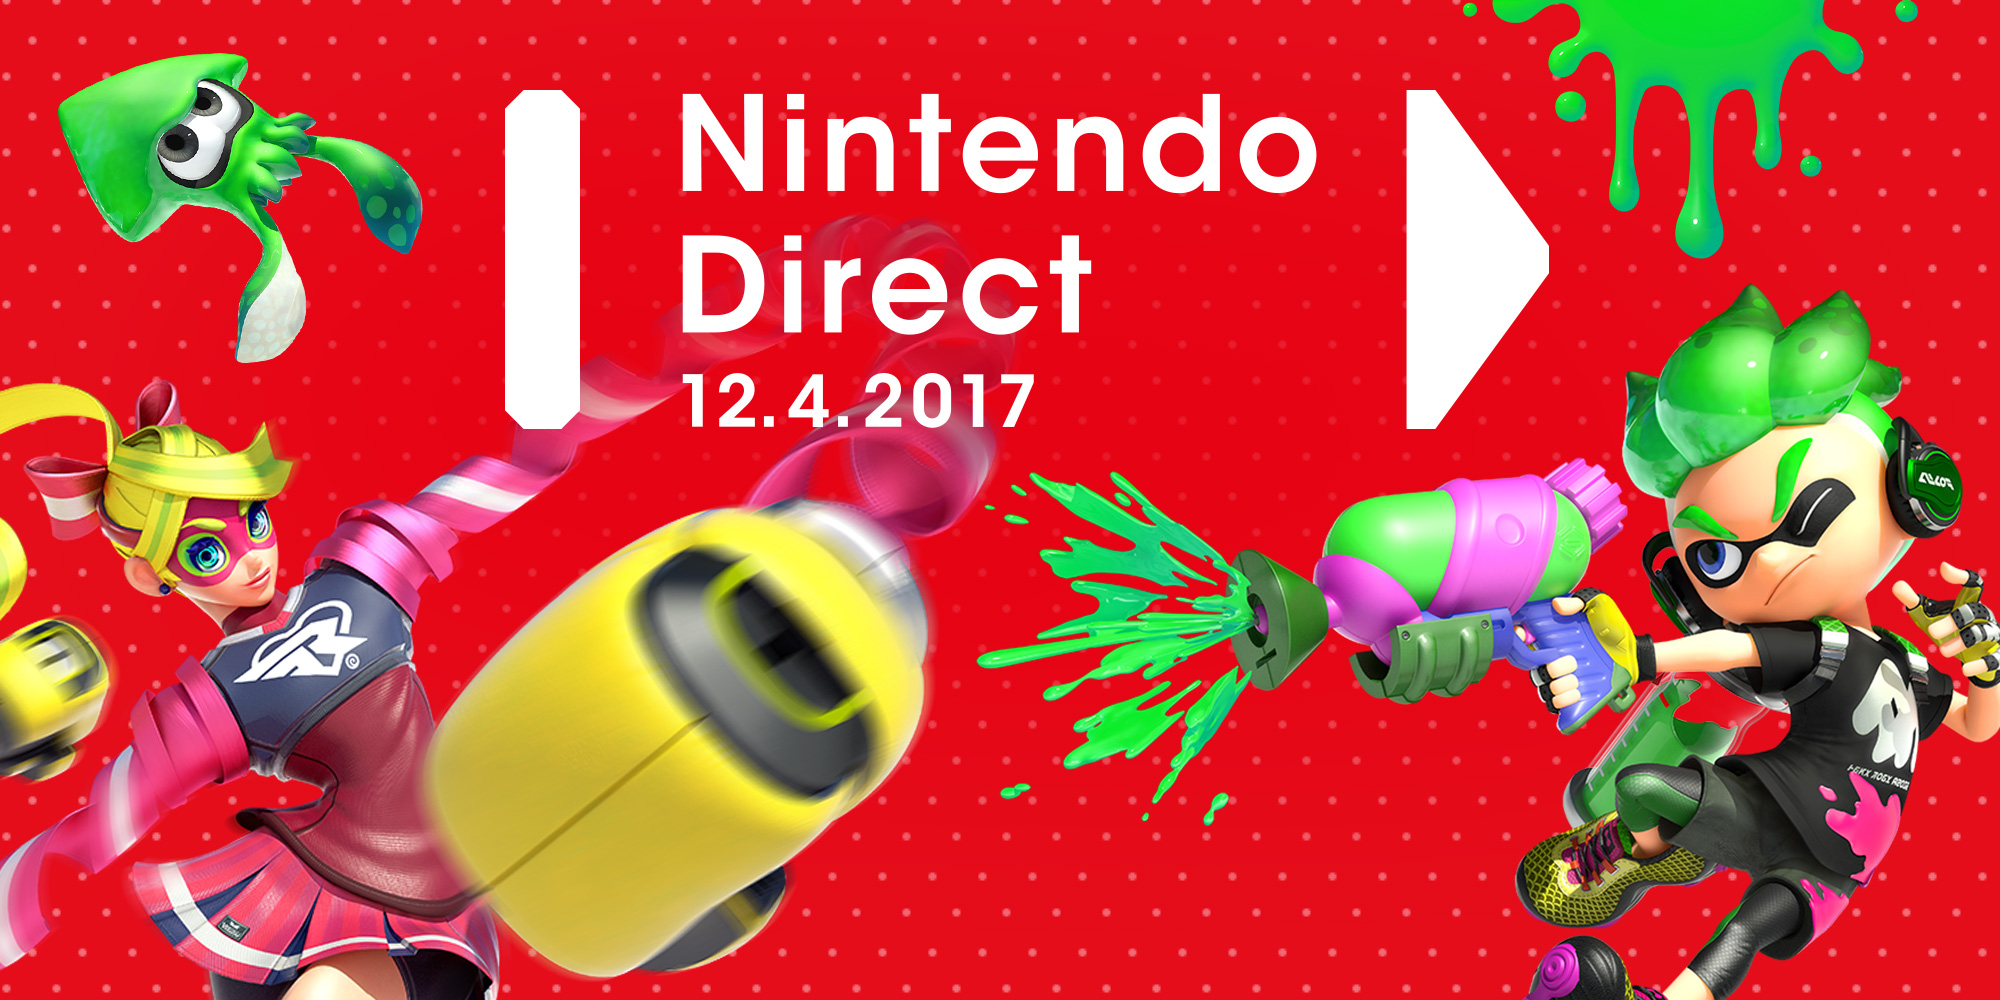 Nintendo Direct Presentation focused on ARMS and Splatoon 2 coming this Wednesday at 11 p.m.!